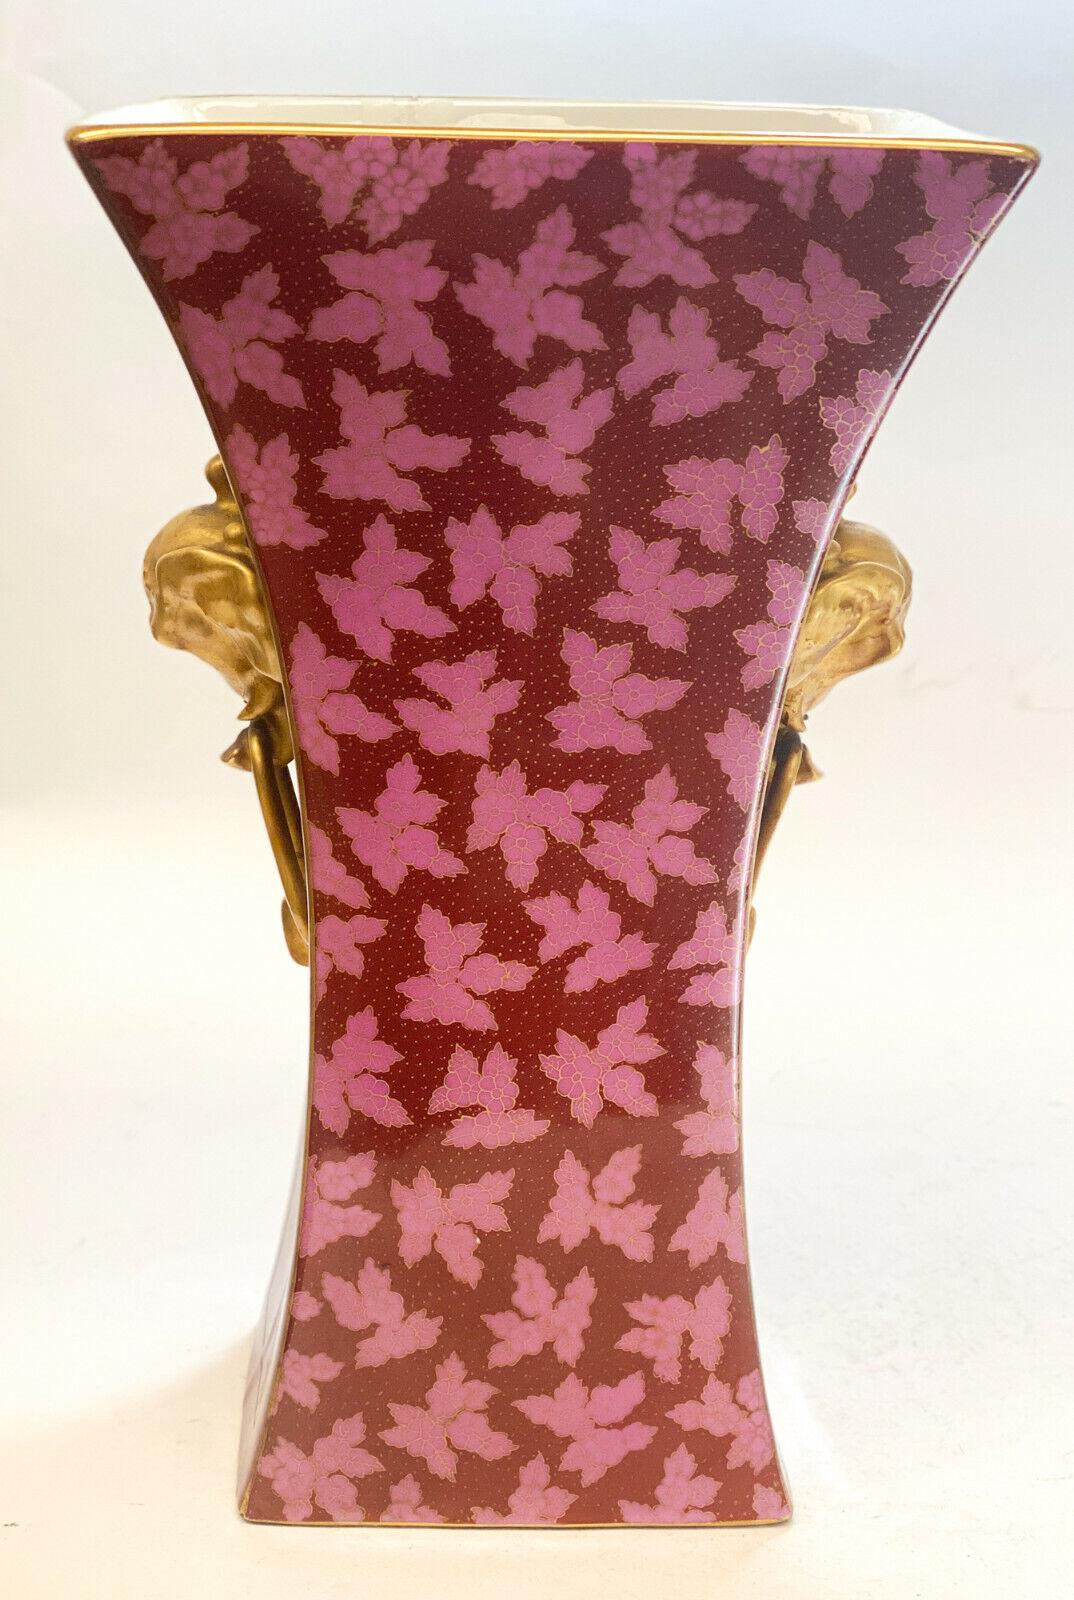 Continental Porcelain Japonism Hand Painted & Gilt Encrusted Twin Handle Vase In Good Condition For Sale In Gardena, CA